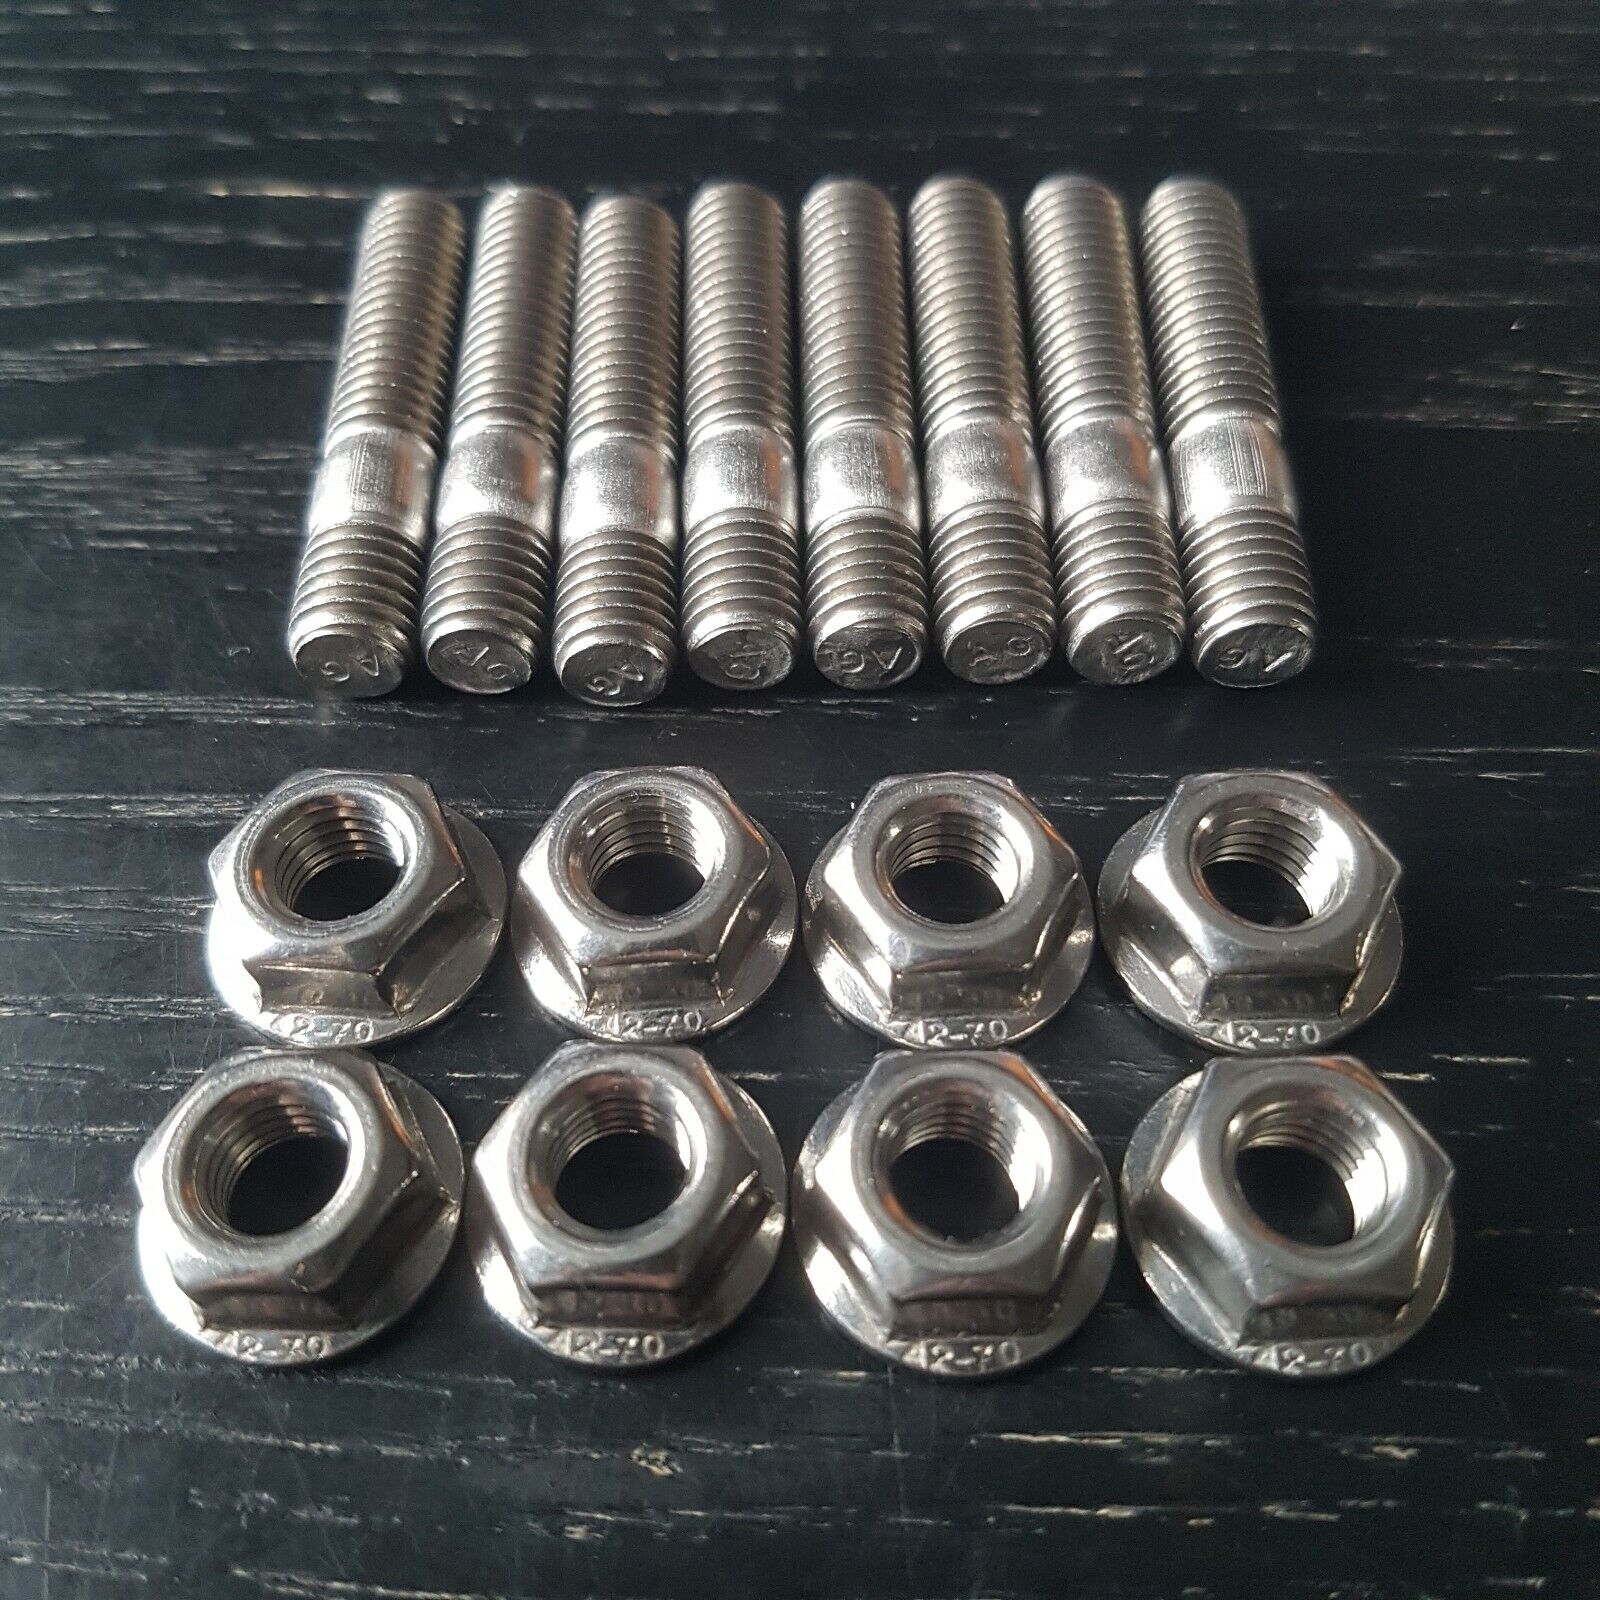 Ford Pinto Exhaust Manifold Studs, Flange Nuts Escort Mk1 Mk2 A2 Stainless steel